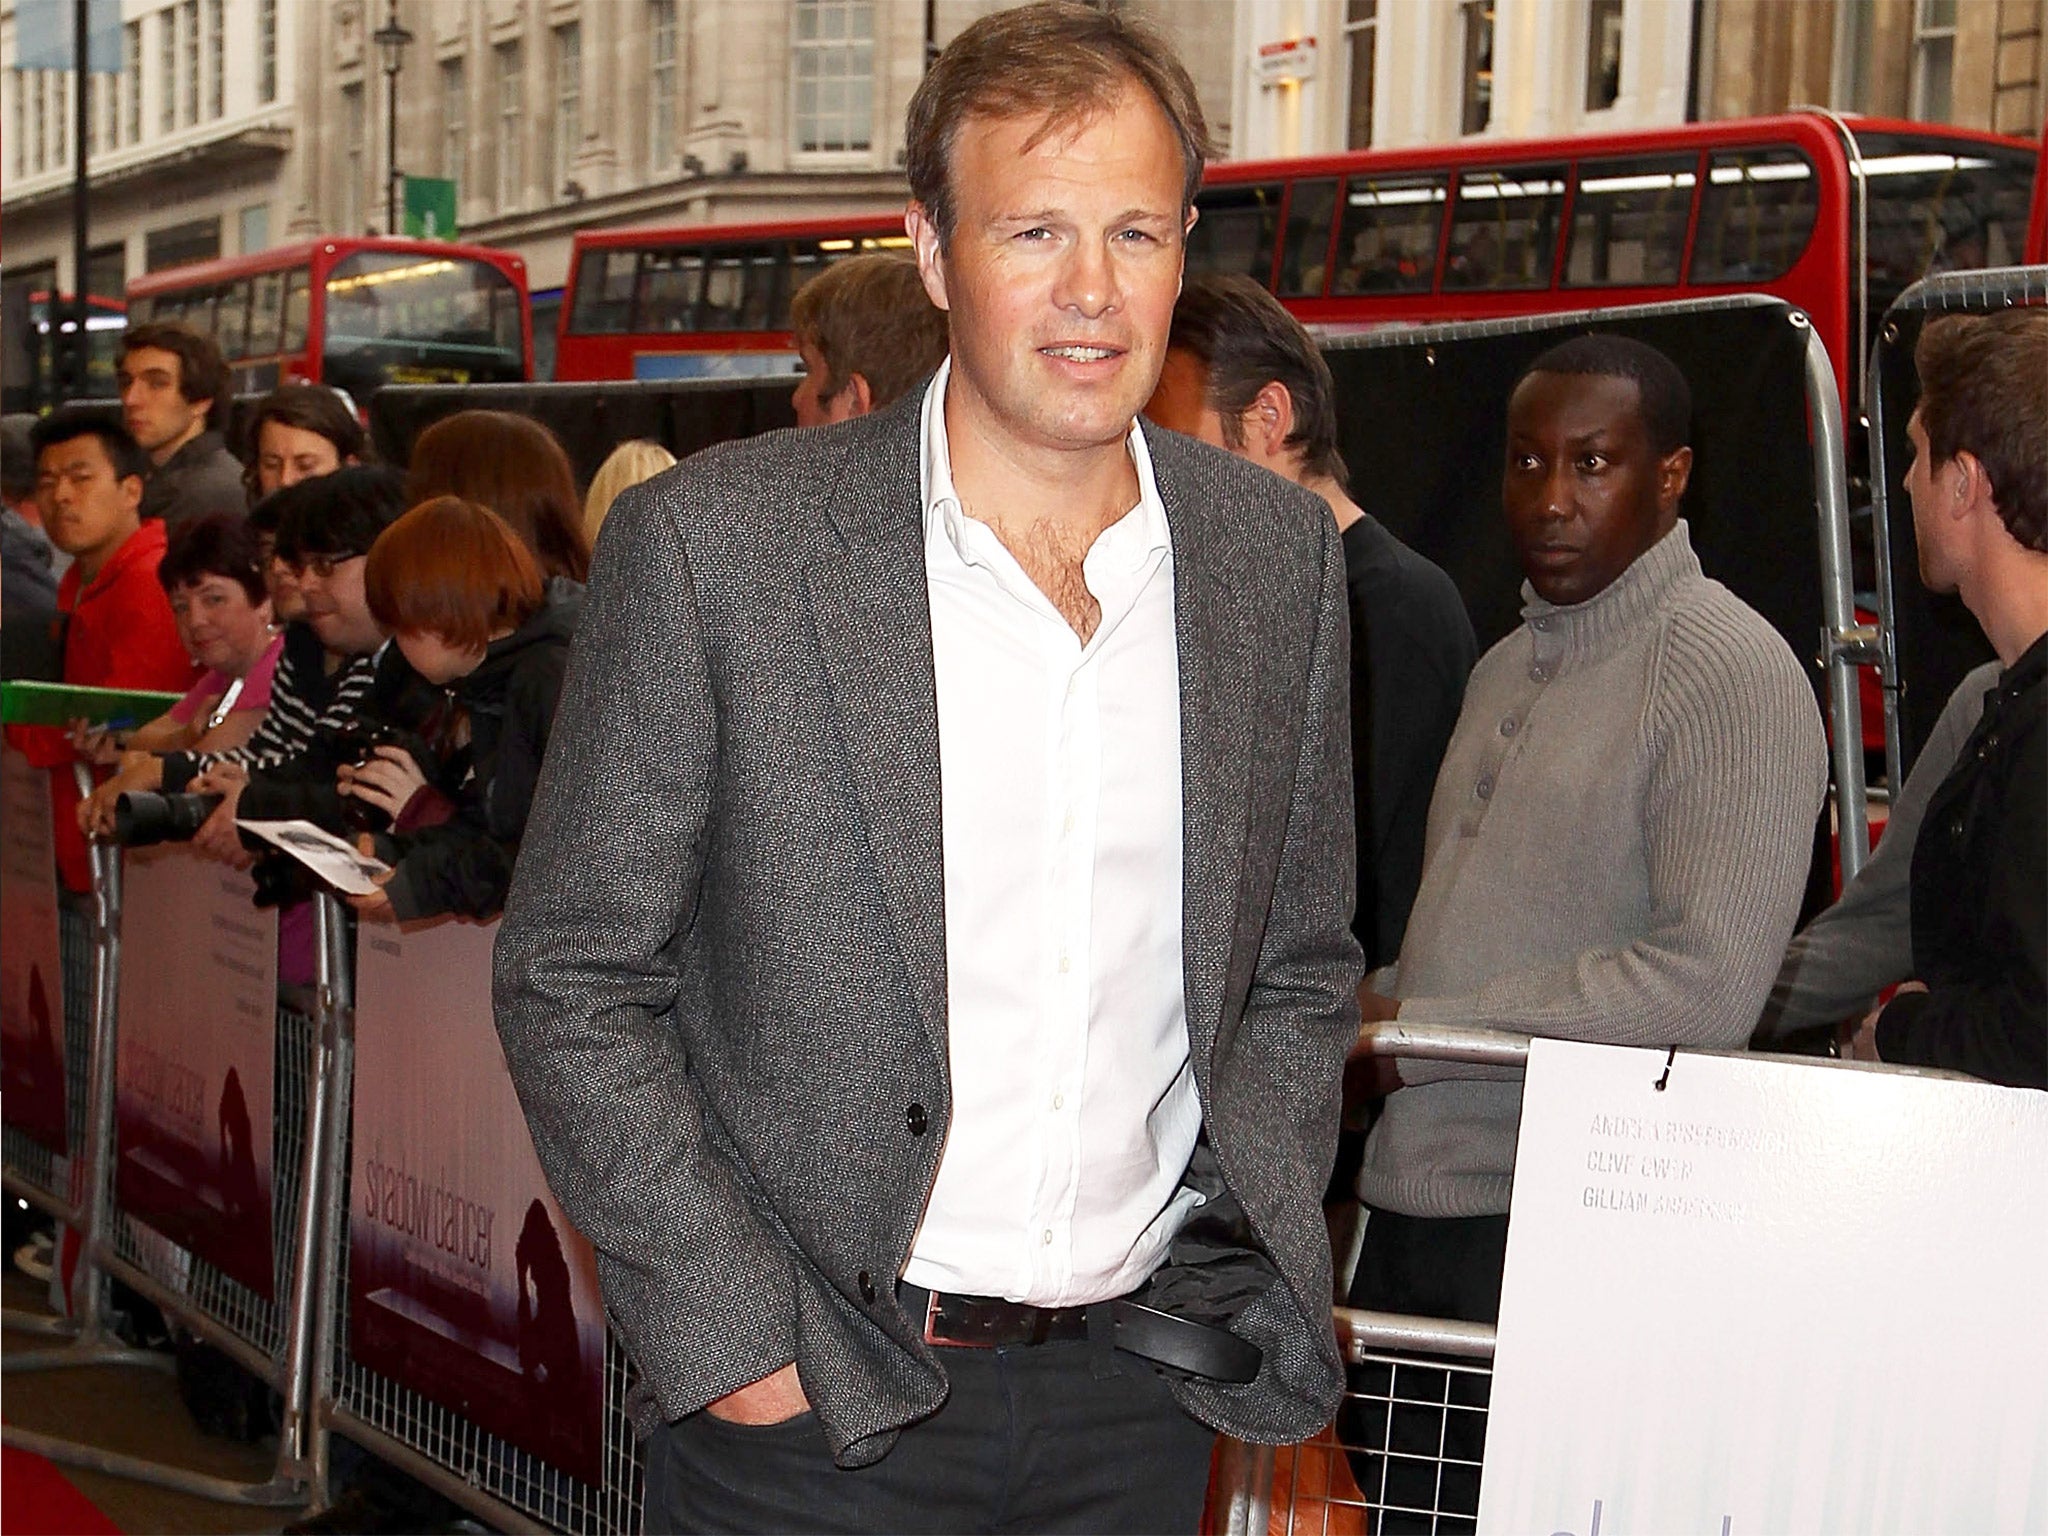 'The Great Fire' is written by ITN’s Political Editor, Tom Bradby